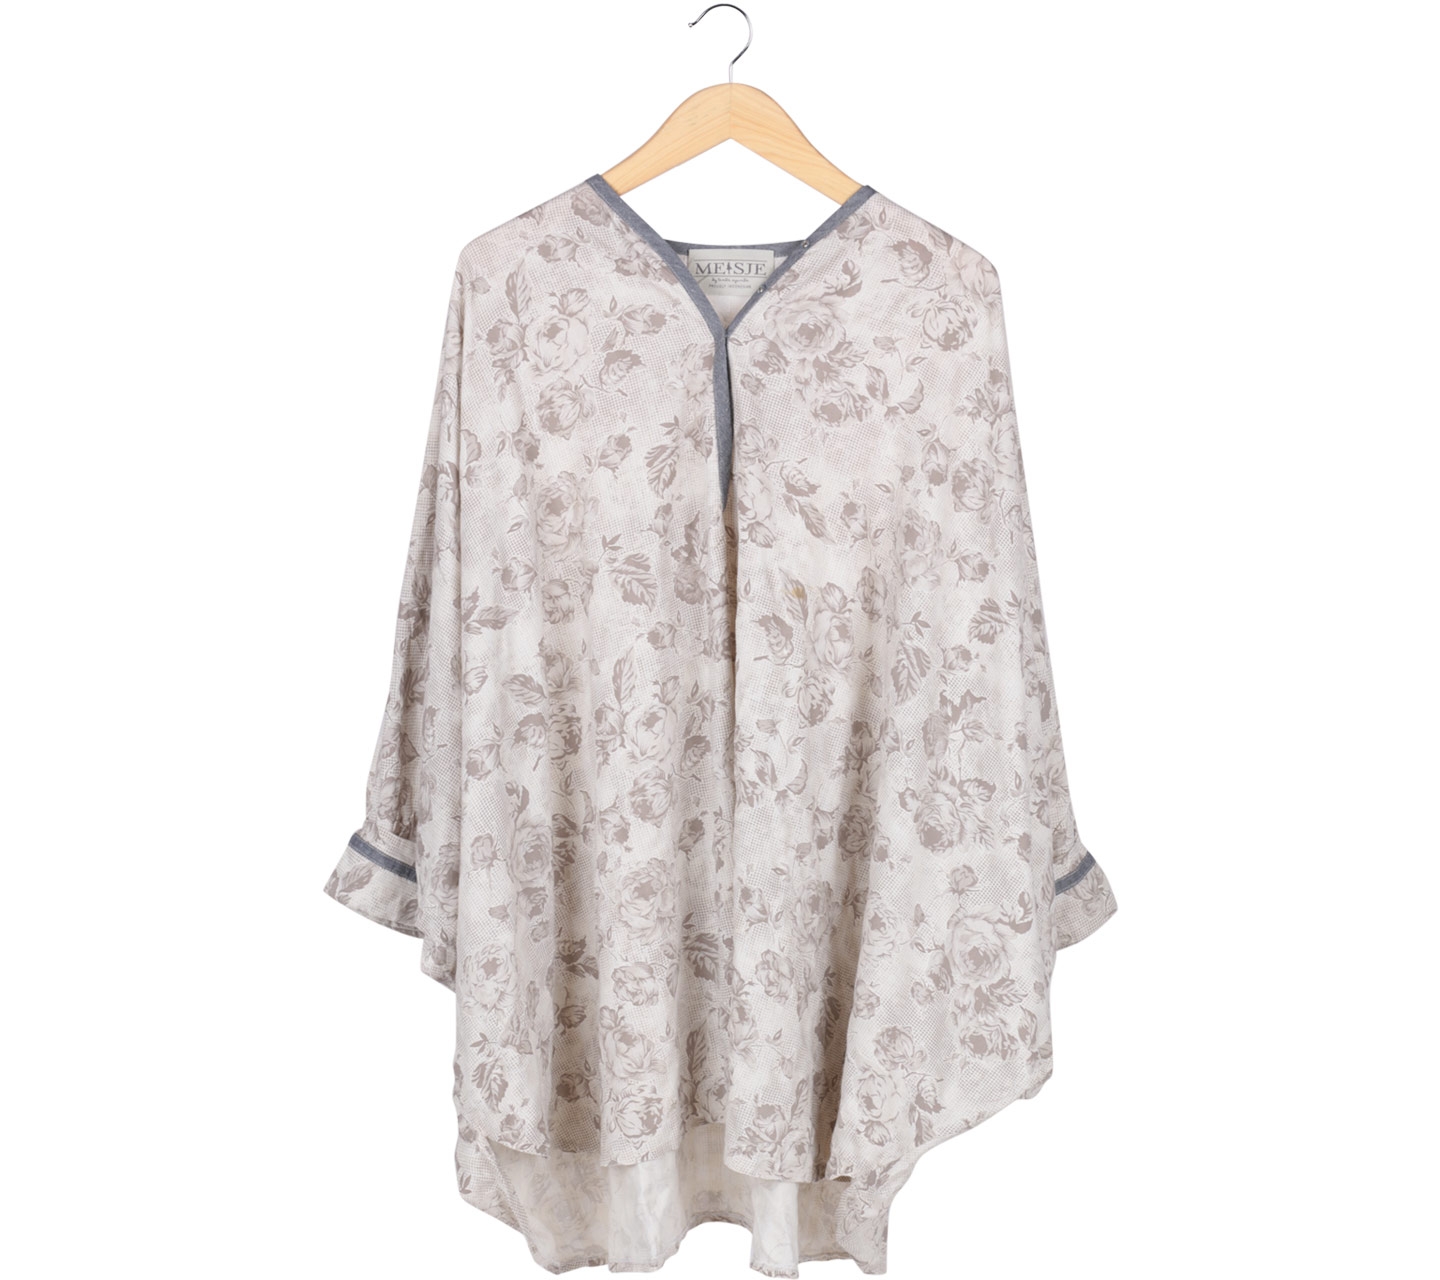 Meisje by Tantri Cream FLoral Loose Blouse